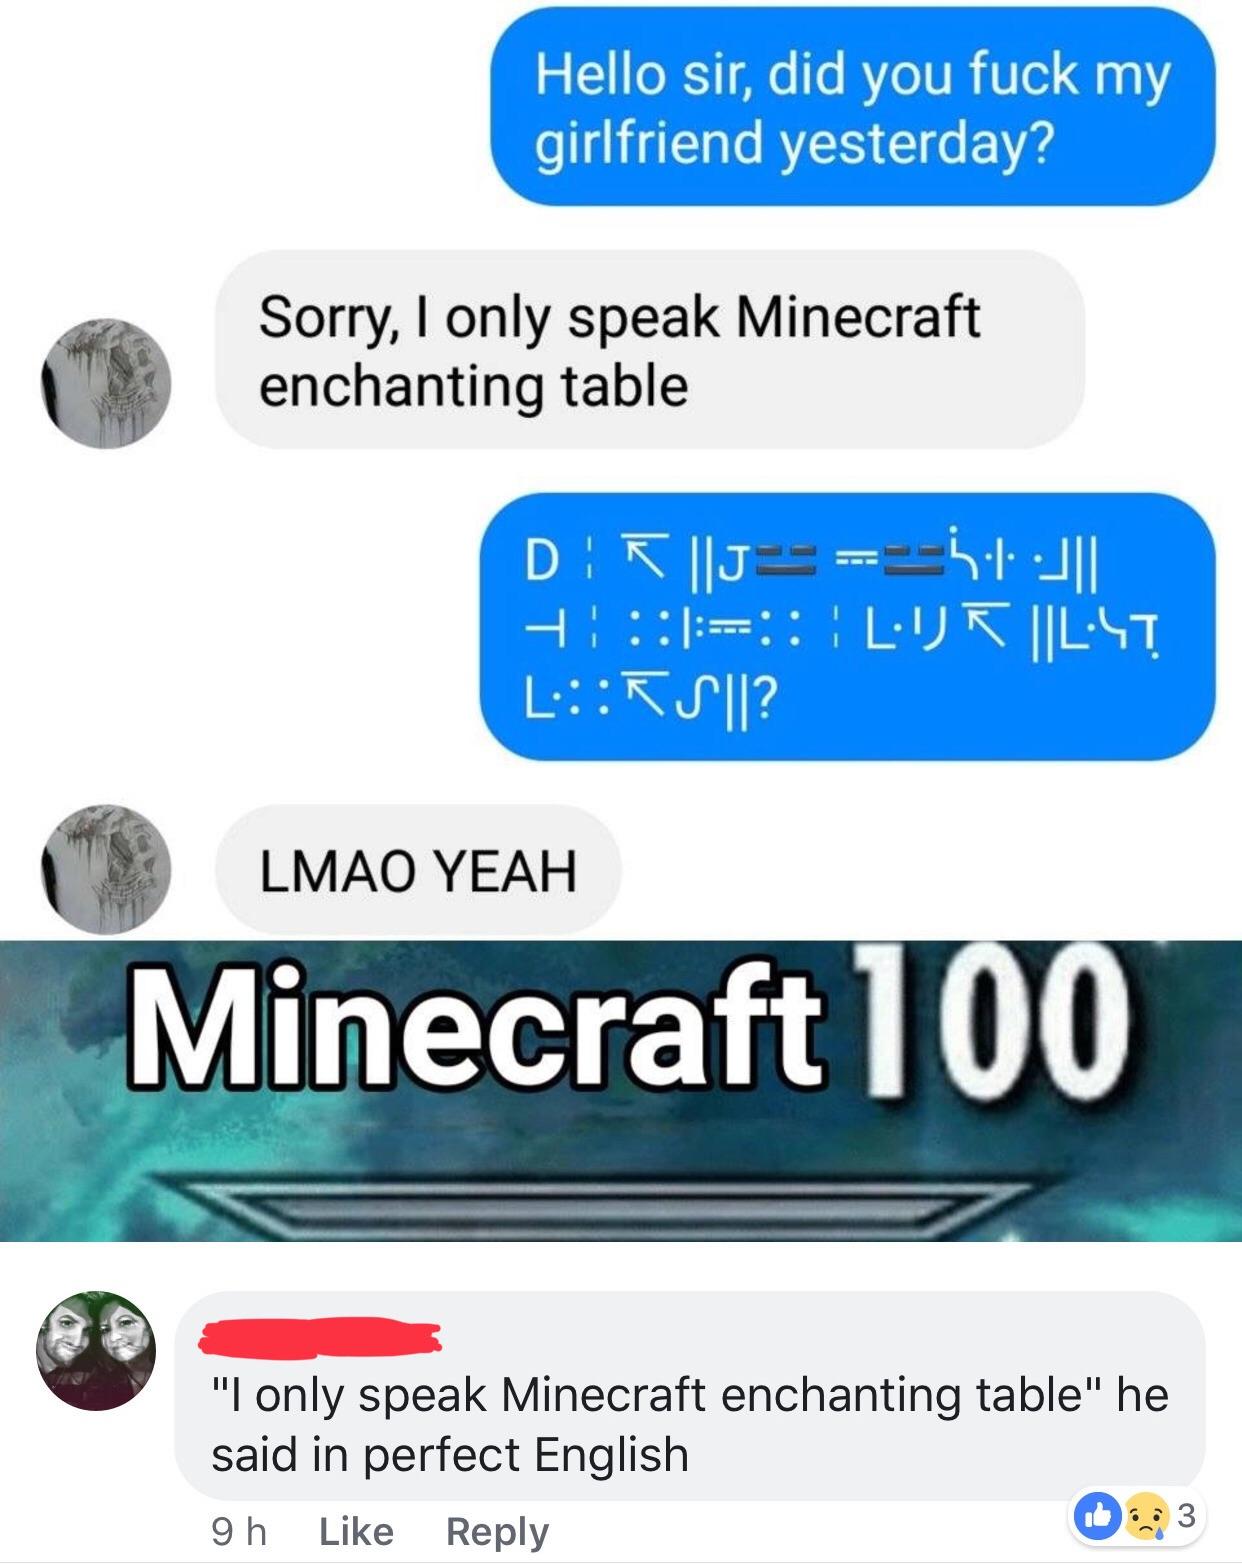 Na mate hes clearly speaking Minecraft enchantment table ...